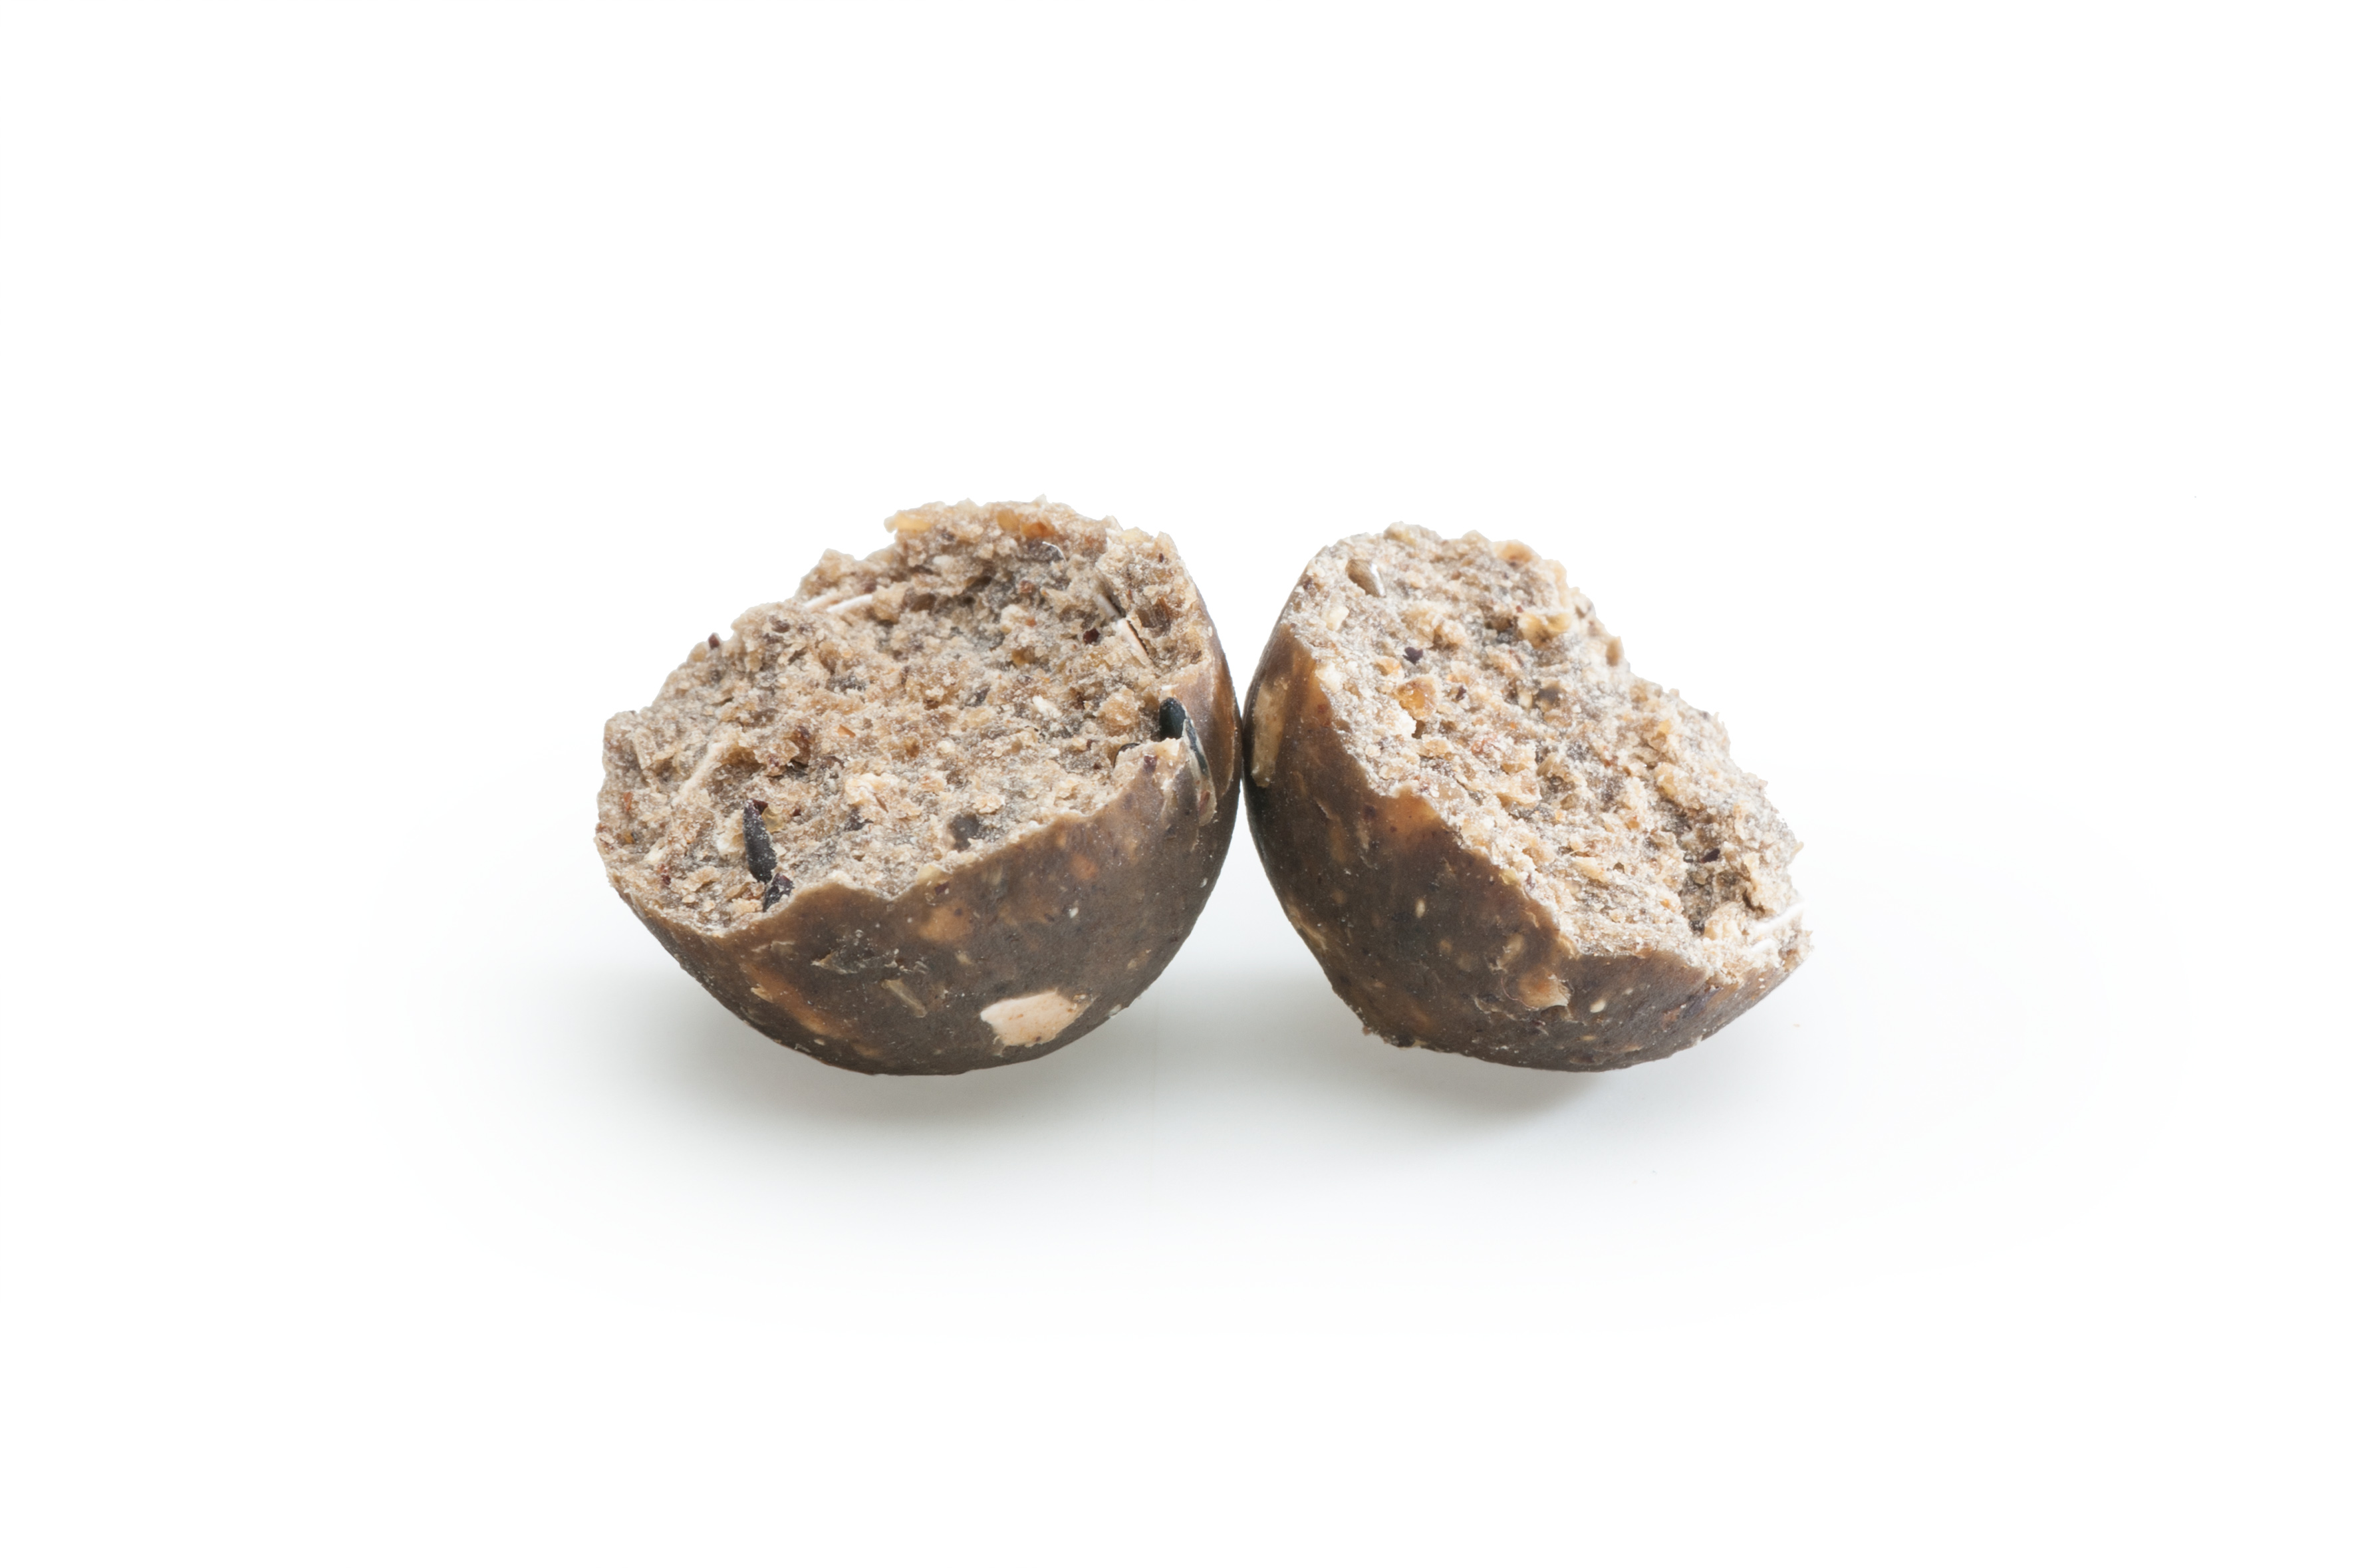 Rapid Boilies Excellent - Monster Crab (3300g | 24mm)